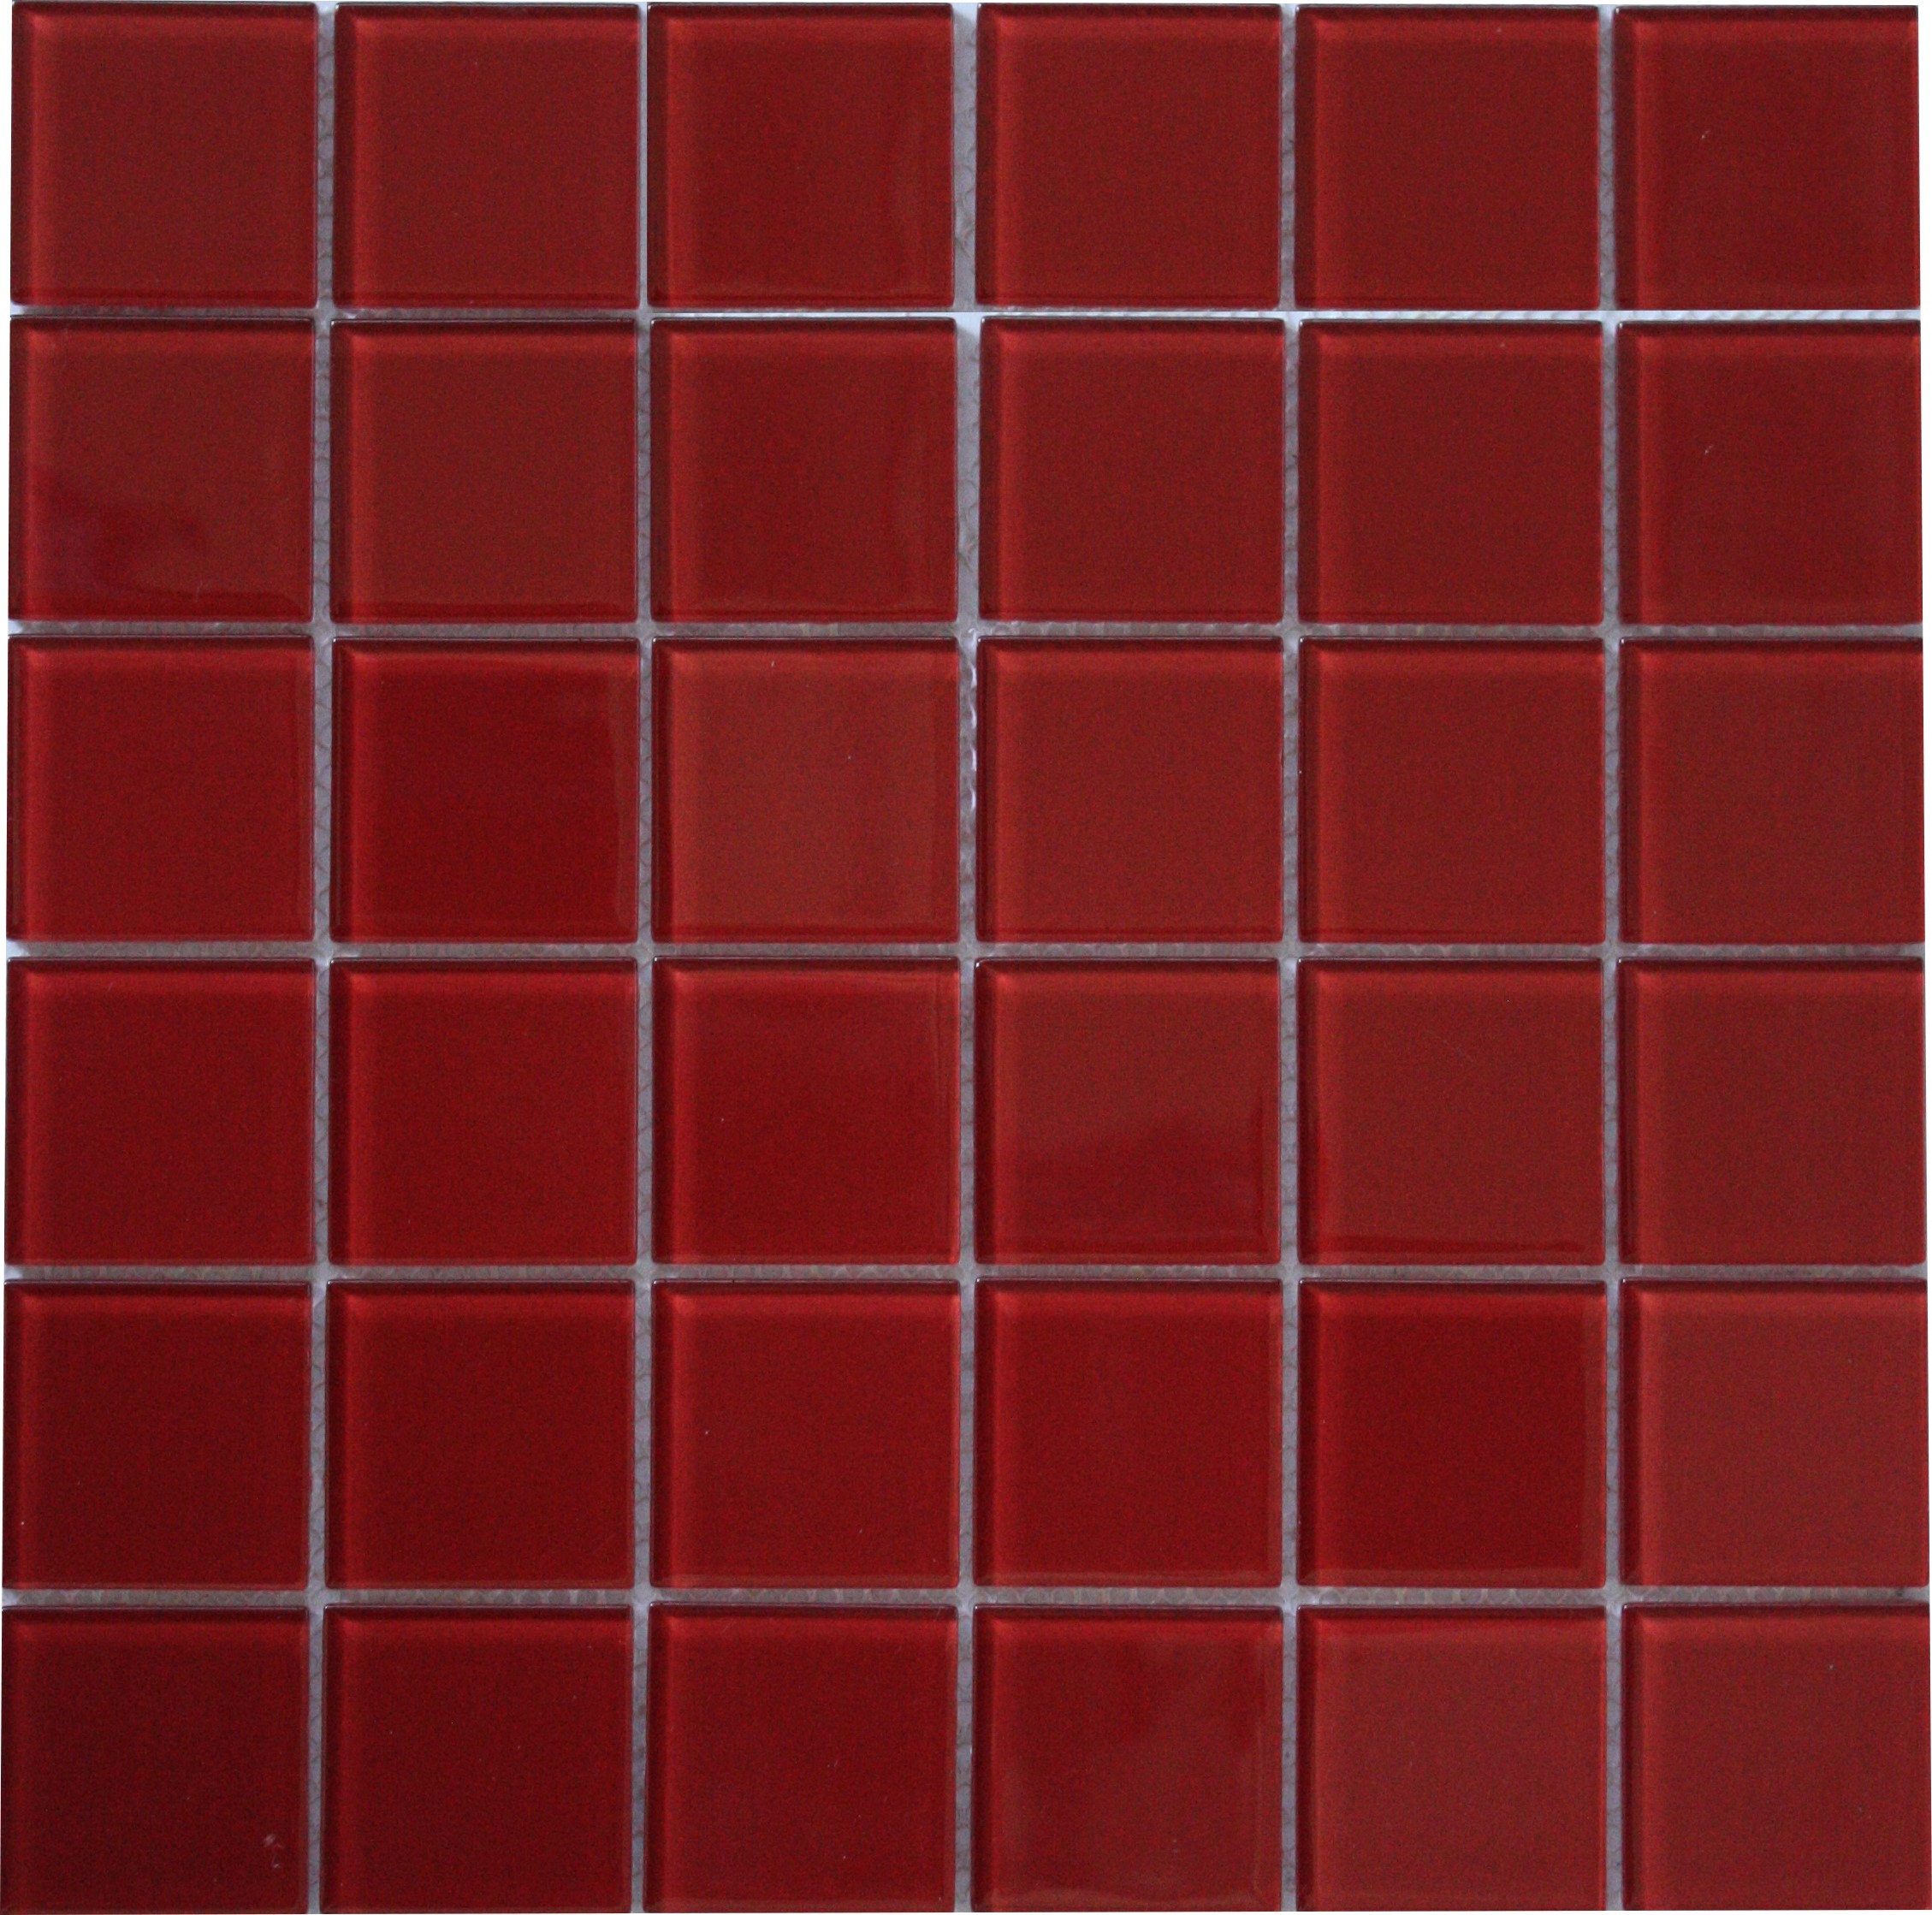 Cherry Red Mosaic tiles | Available from Tiletoria